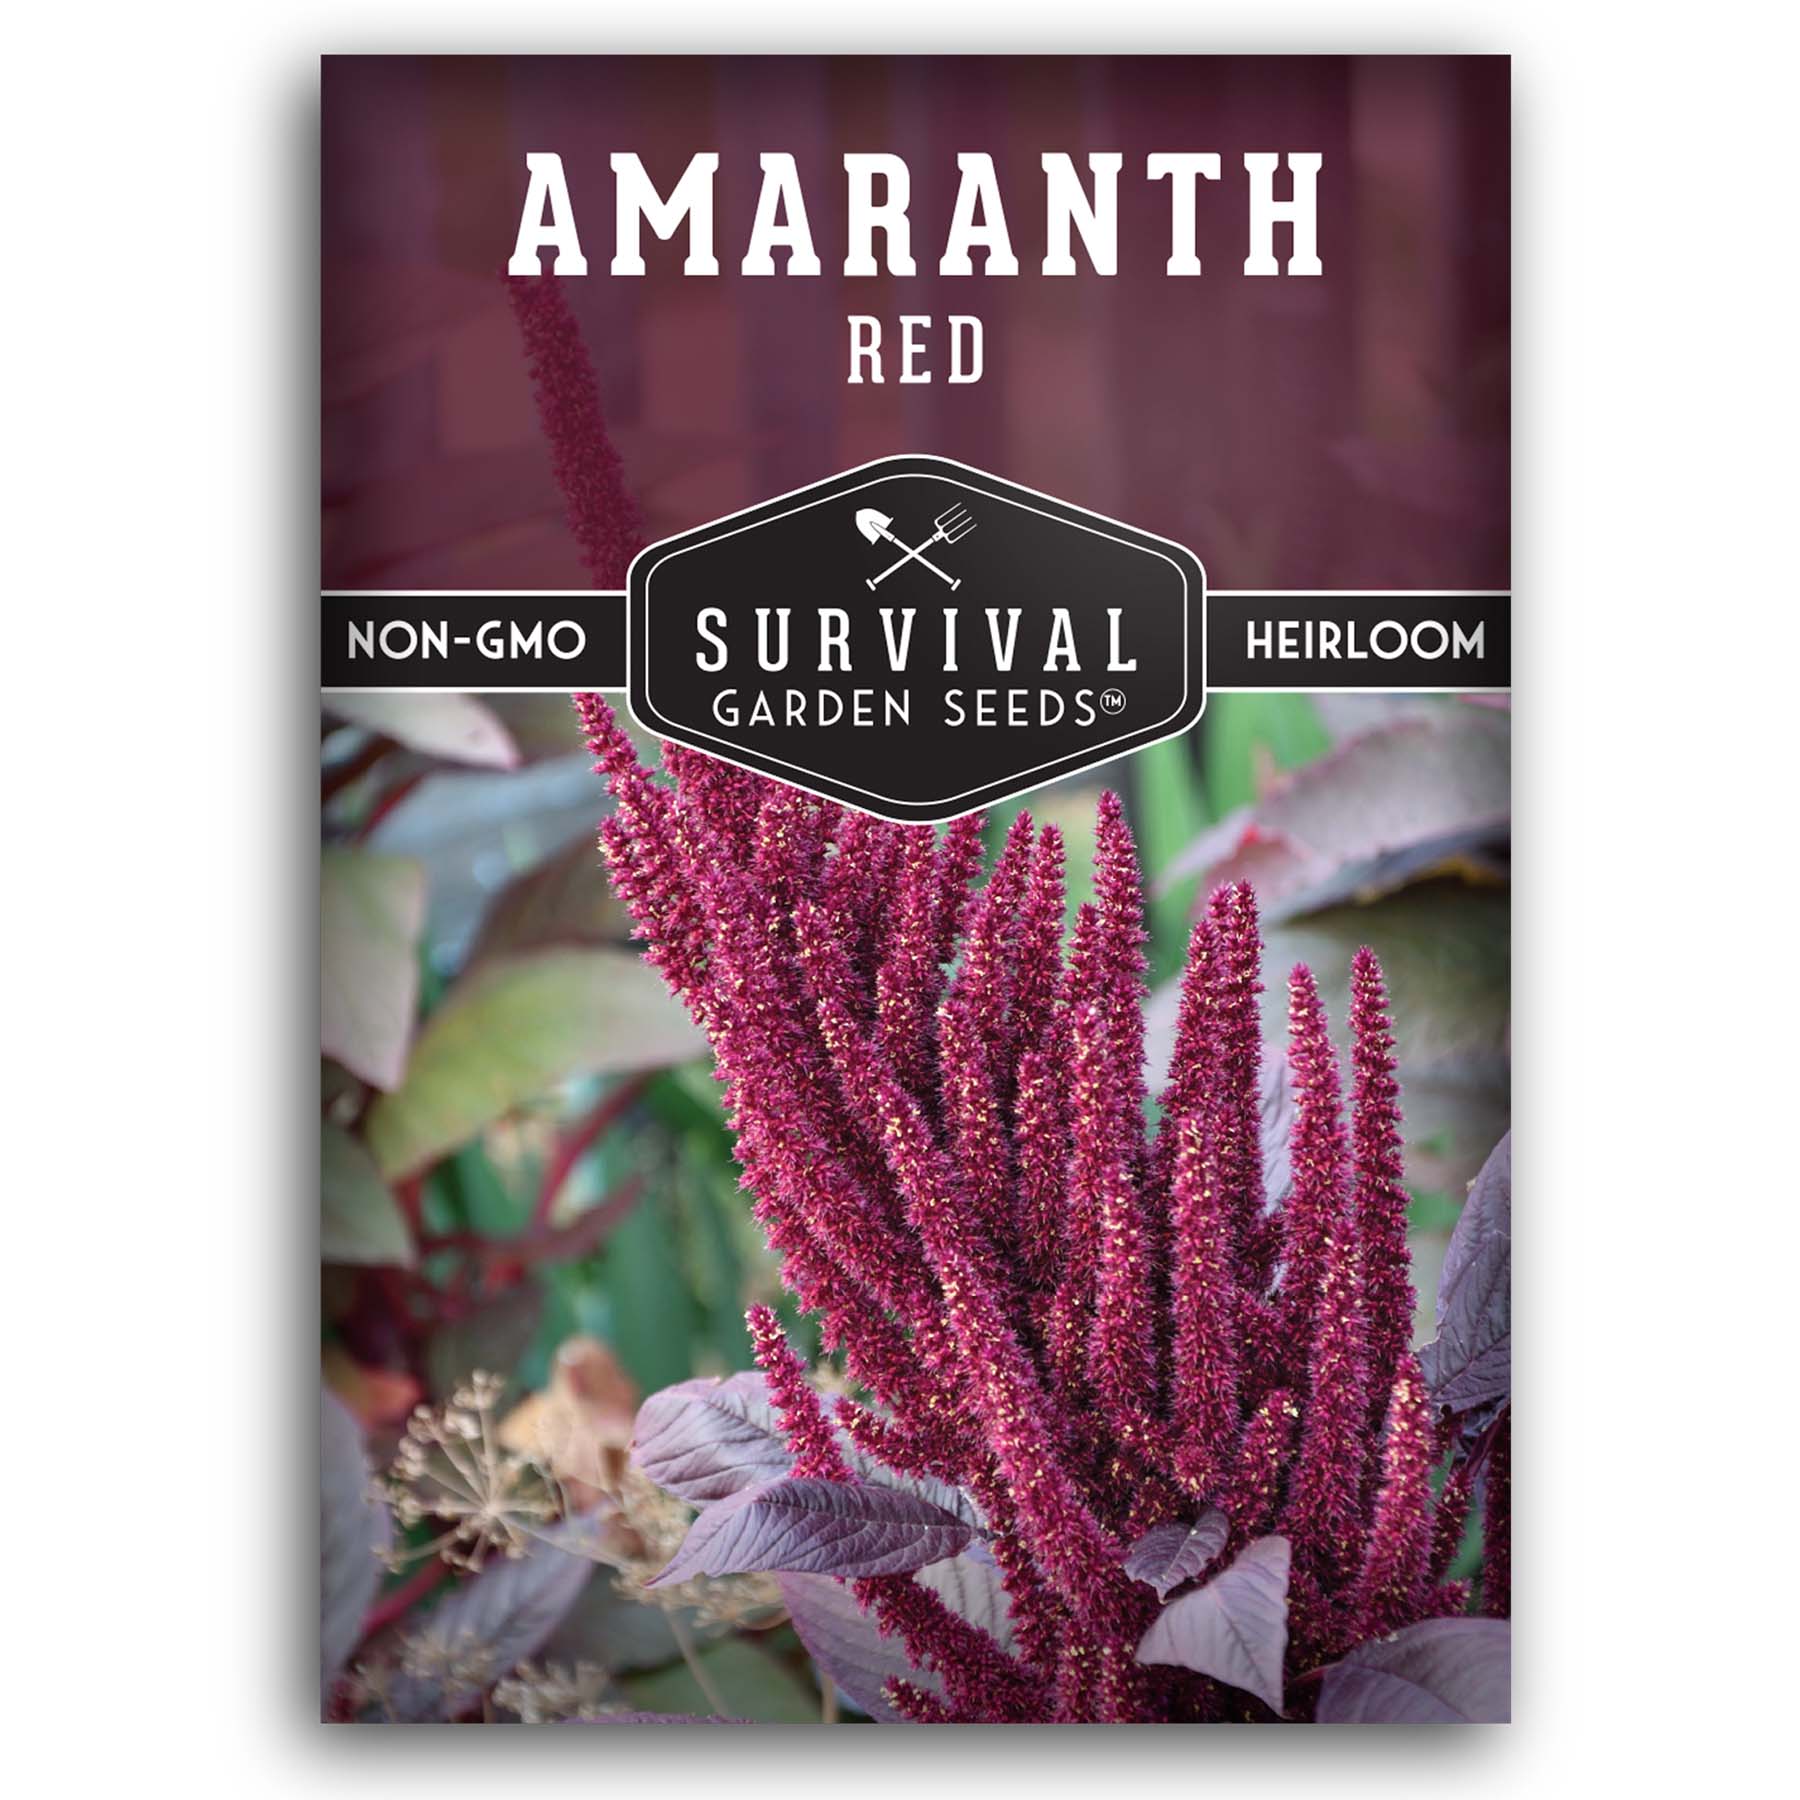 Red Amaranth seeds for planting